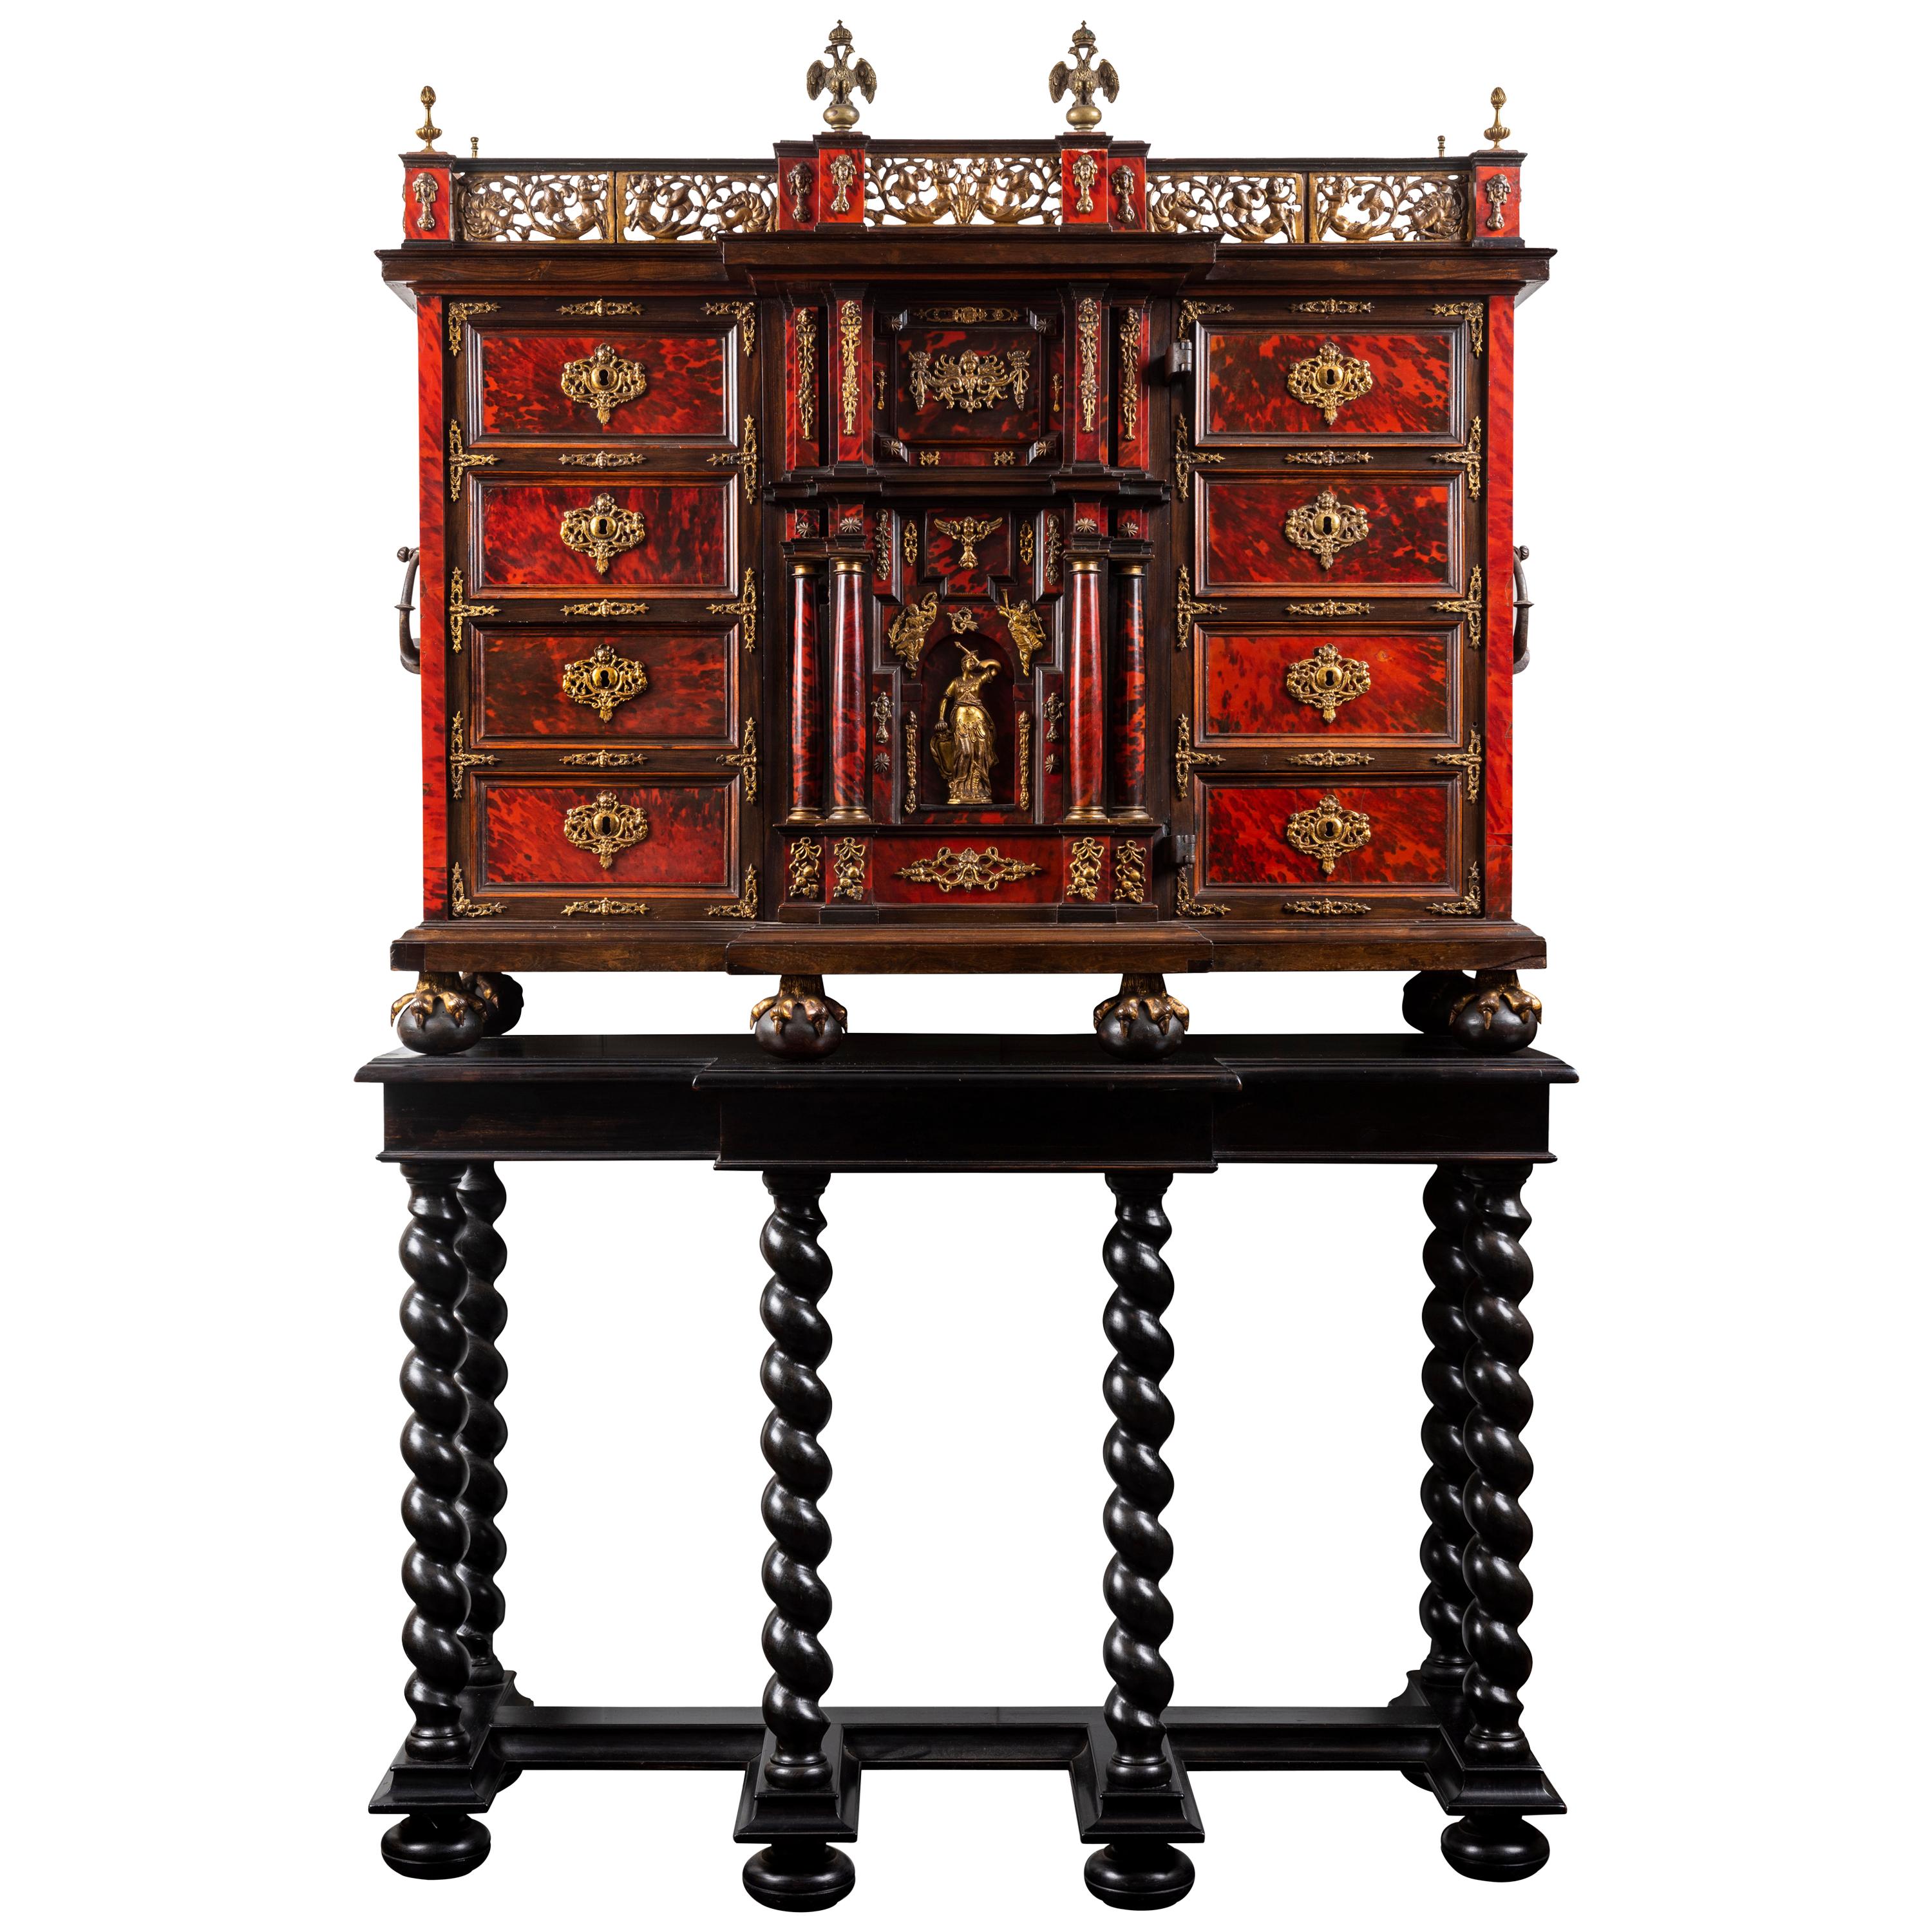 An Austro-Hungarian Late 17th-Early 18th Century Palisander Cabinet on Stand For Sale